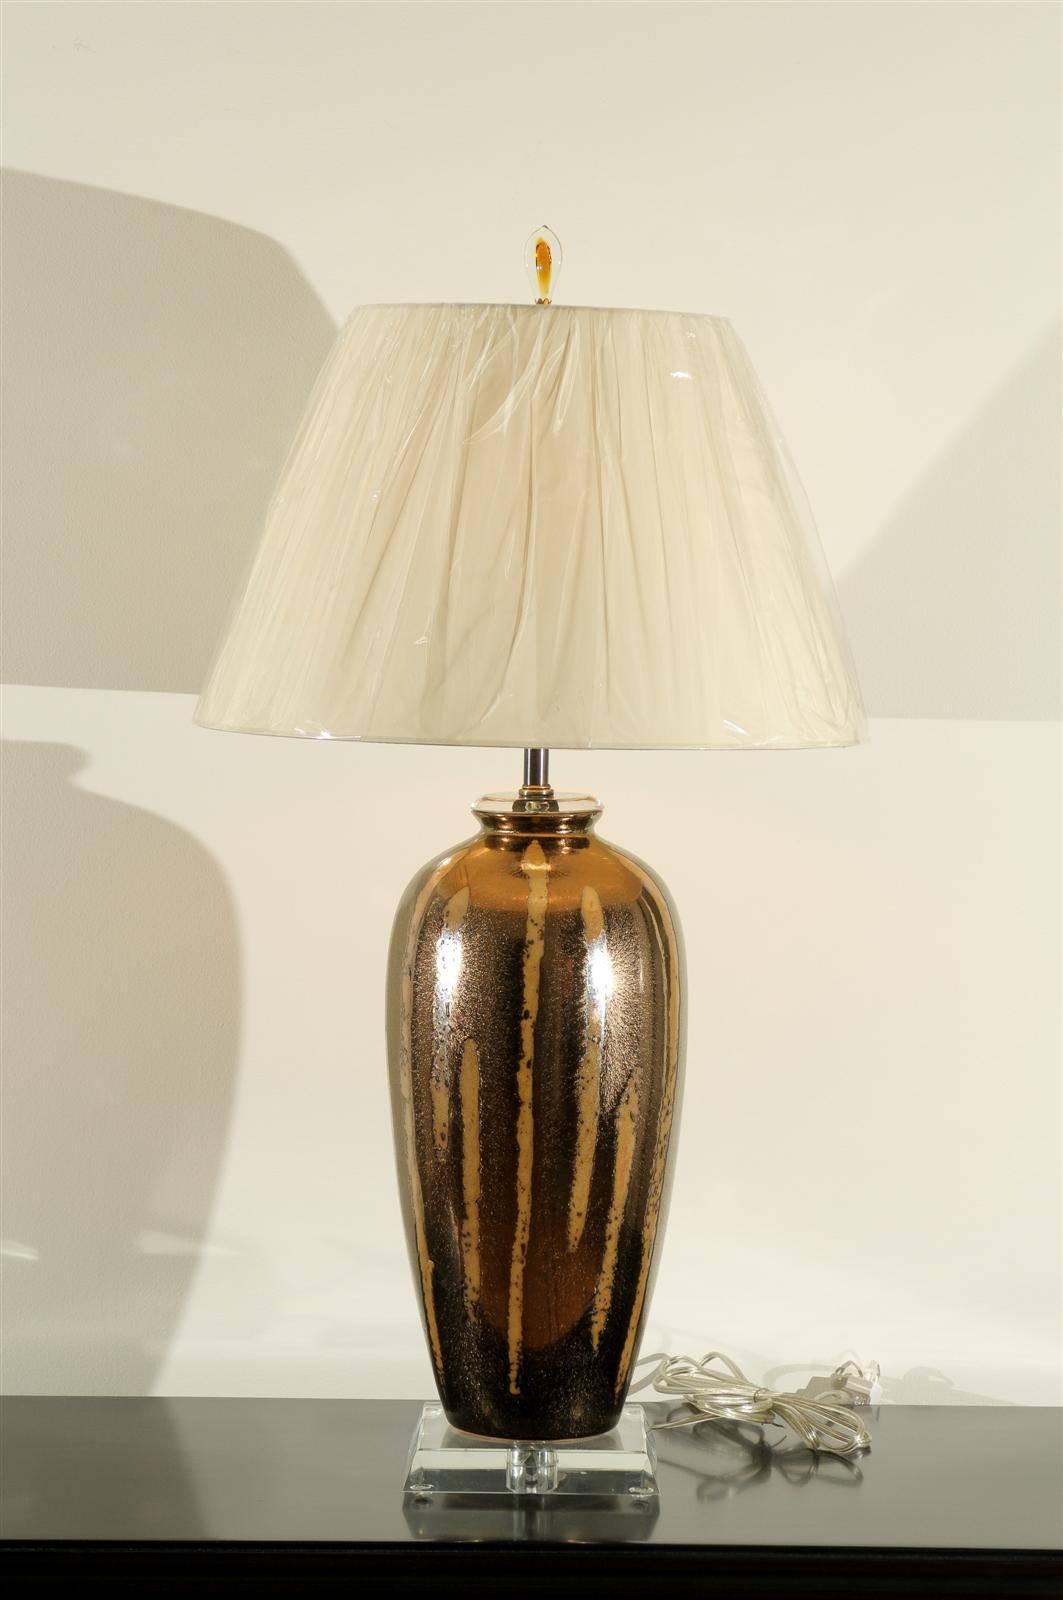 An exceptional pair of large-scale vessels as lamps. Ceramic in copper and bronze tones with an almost metallic glazed finish. Dramatic pieces that are both modern and warm. Exquisite jewelry! Excellent restored condition. Wired using clear cord;